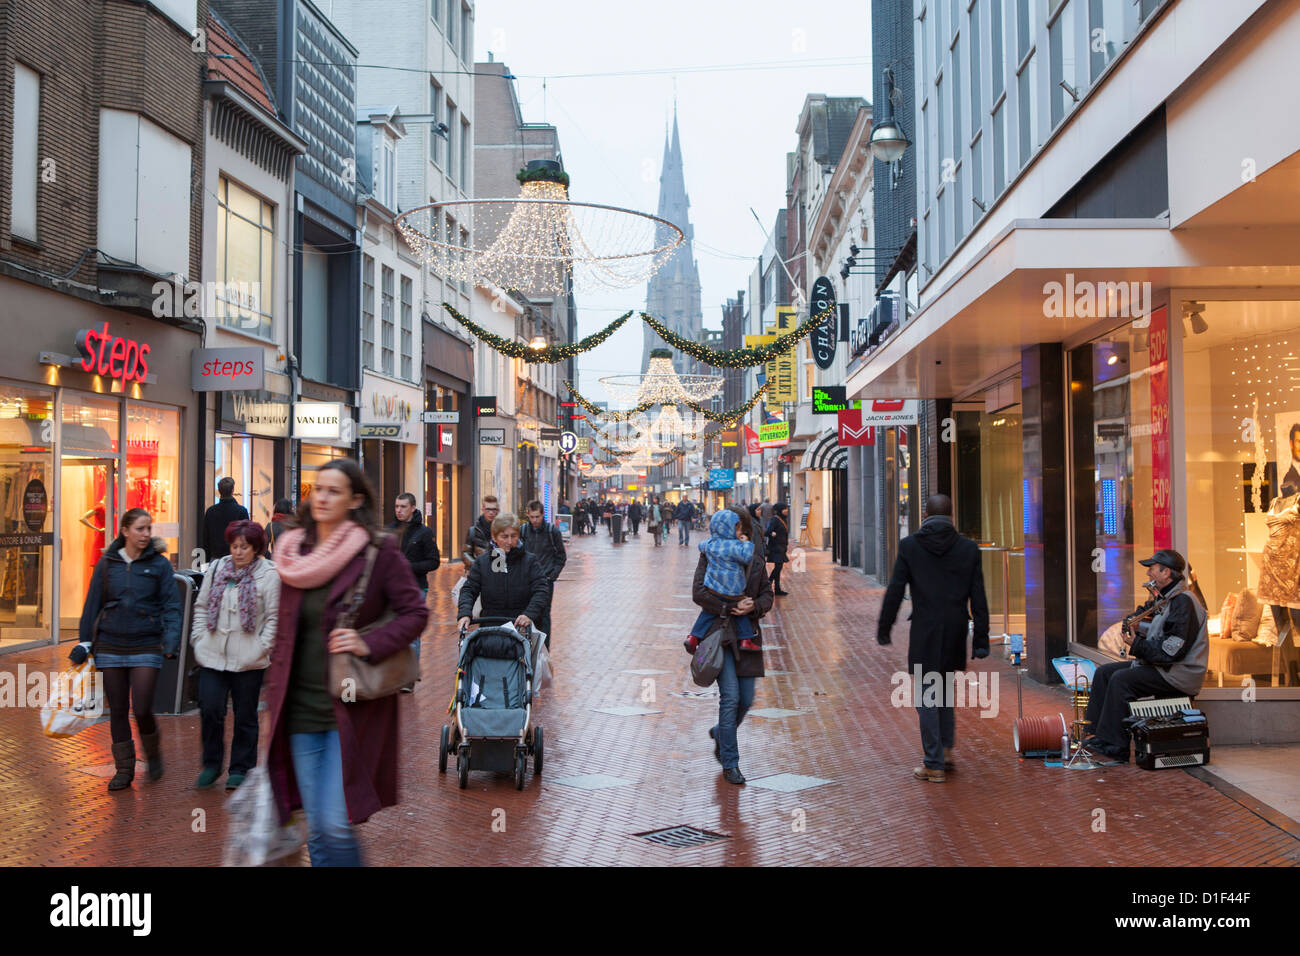 Main shopping street of Eindhoven city center in the Netherlands during winter Stock Photo